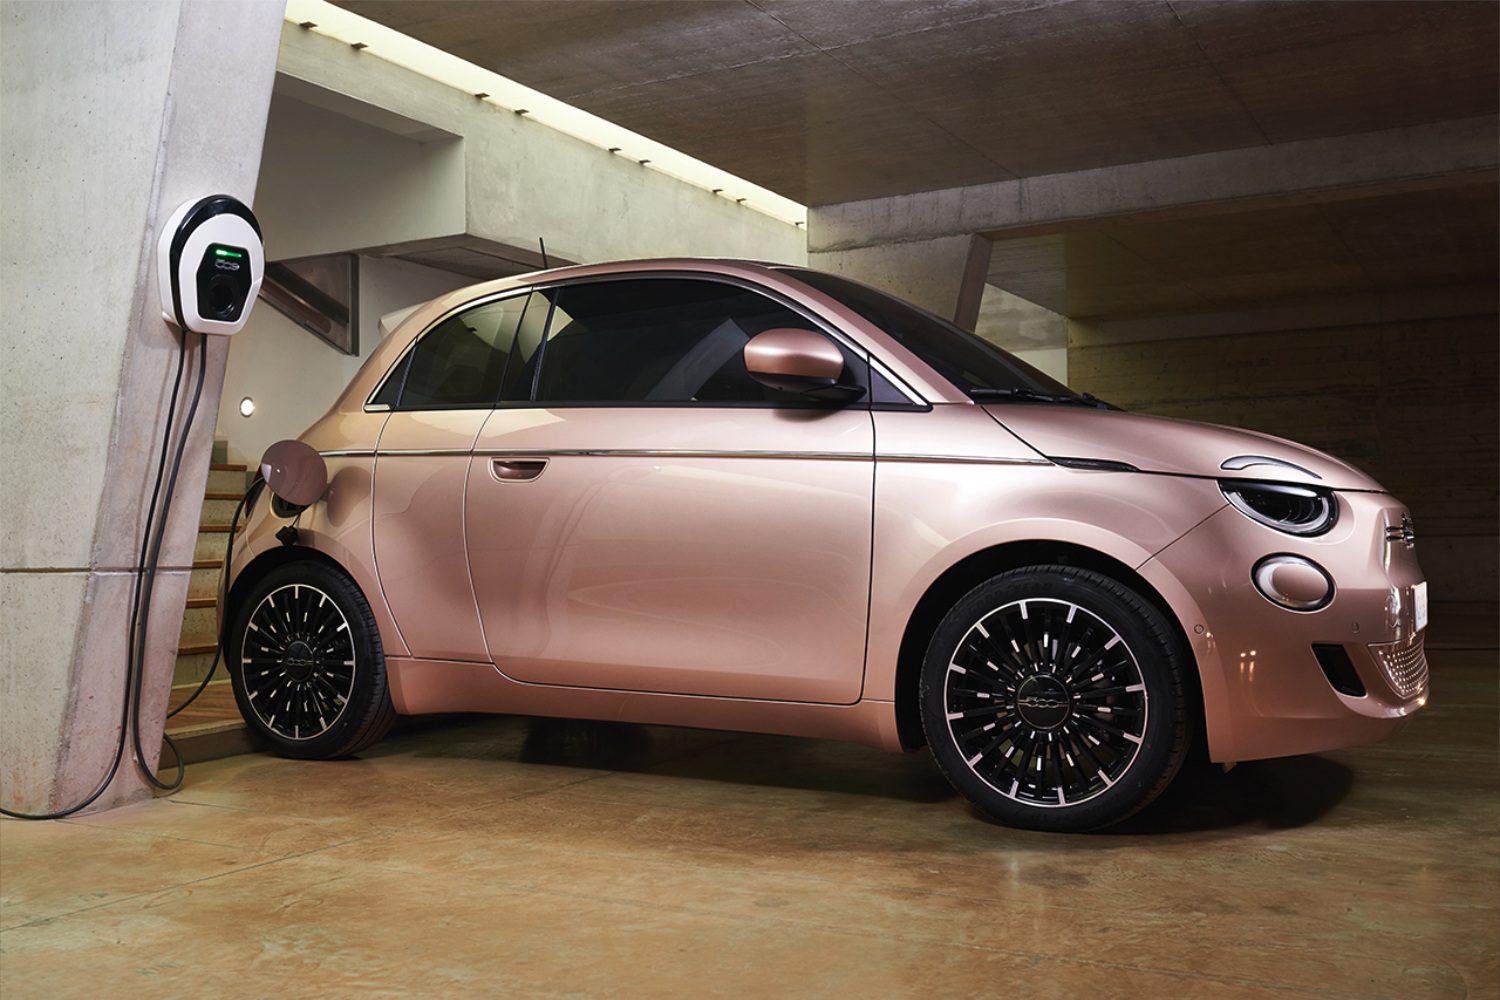 Fiat wants to convert its 500e to gasoline: what's happening?